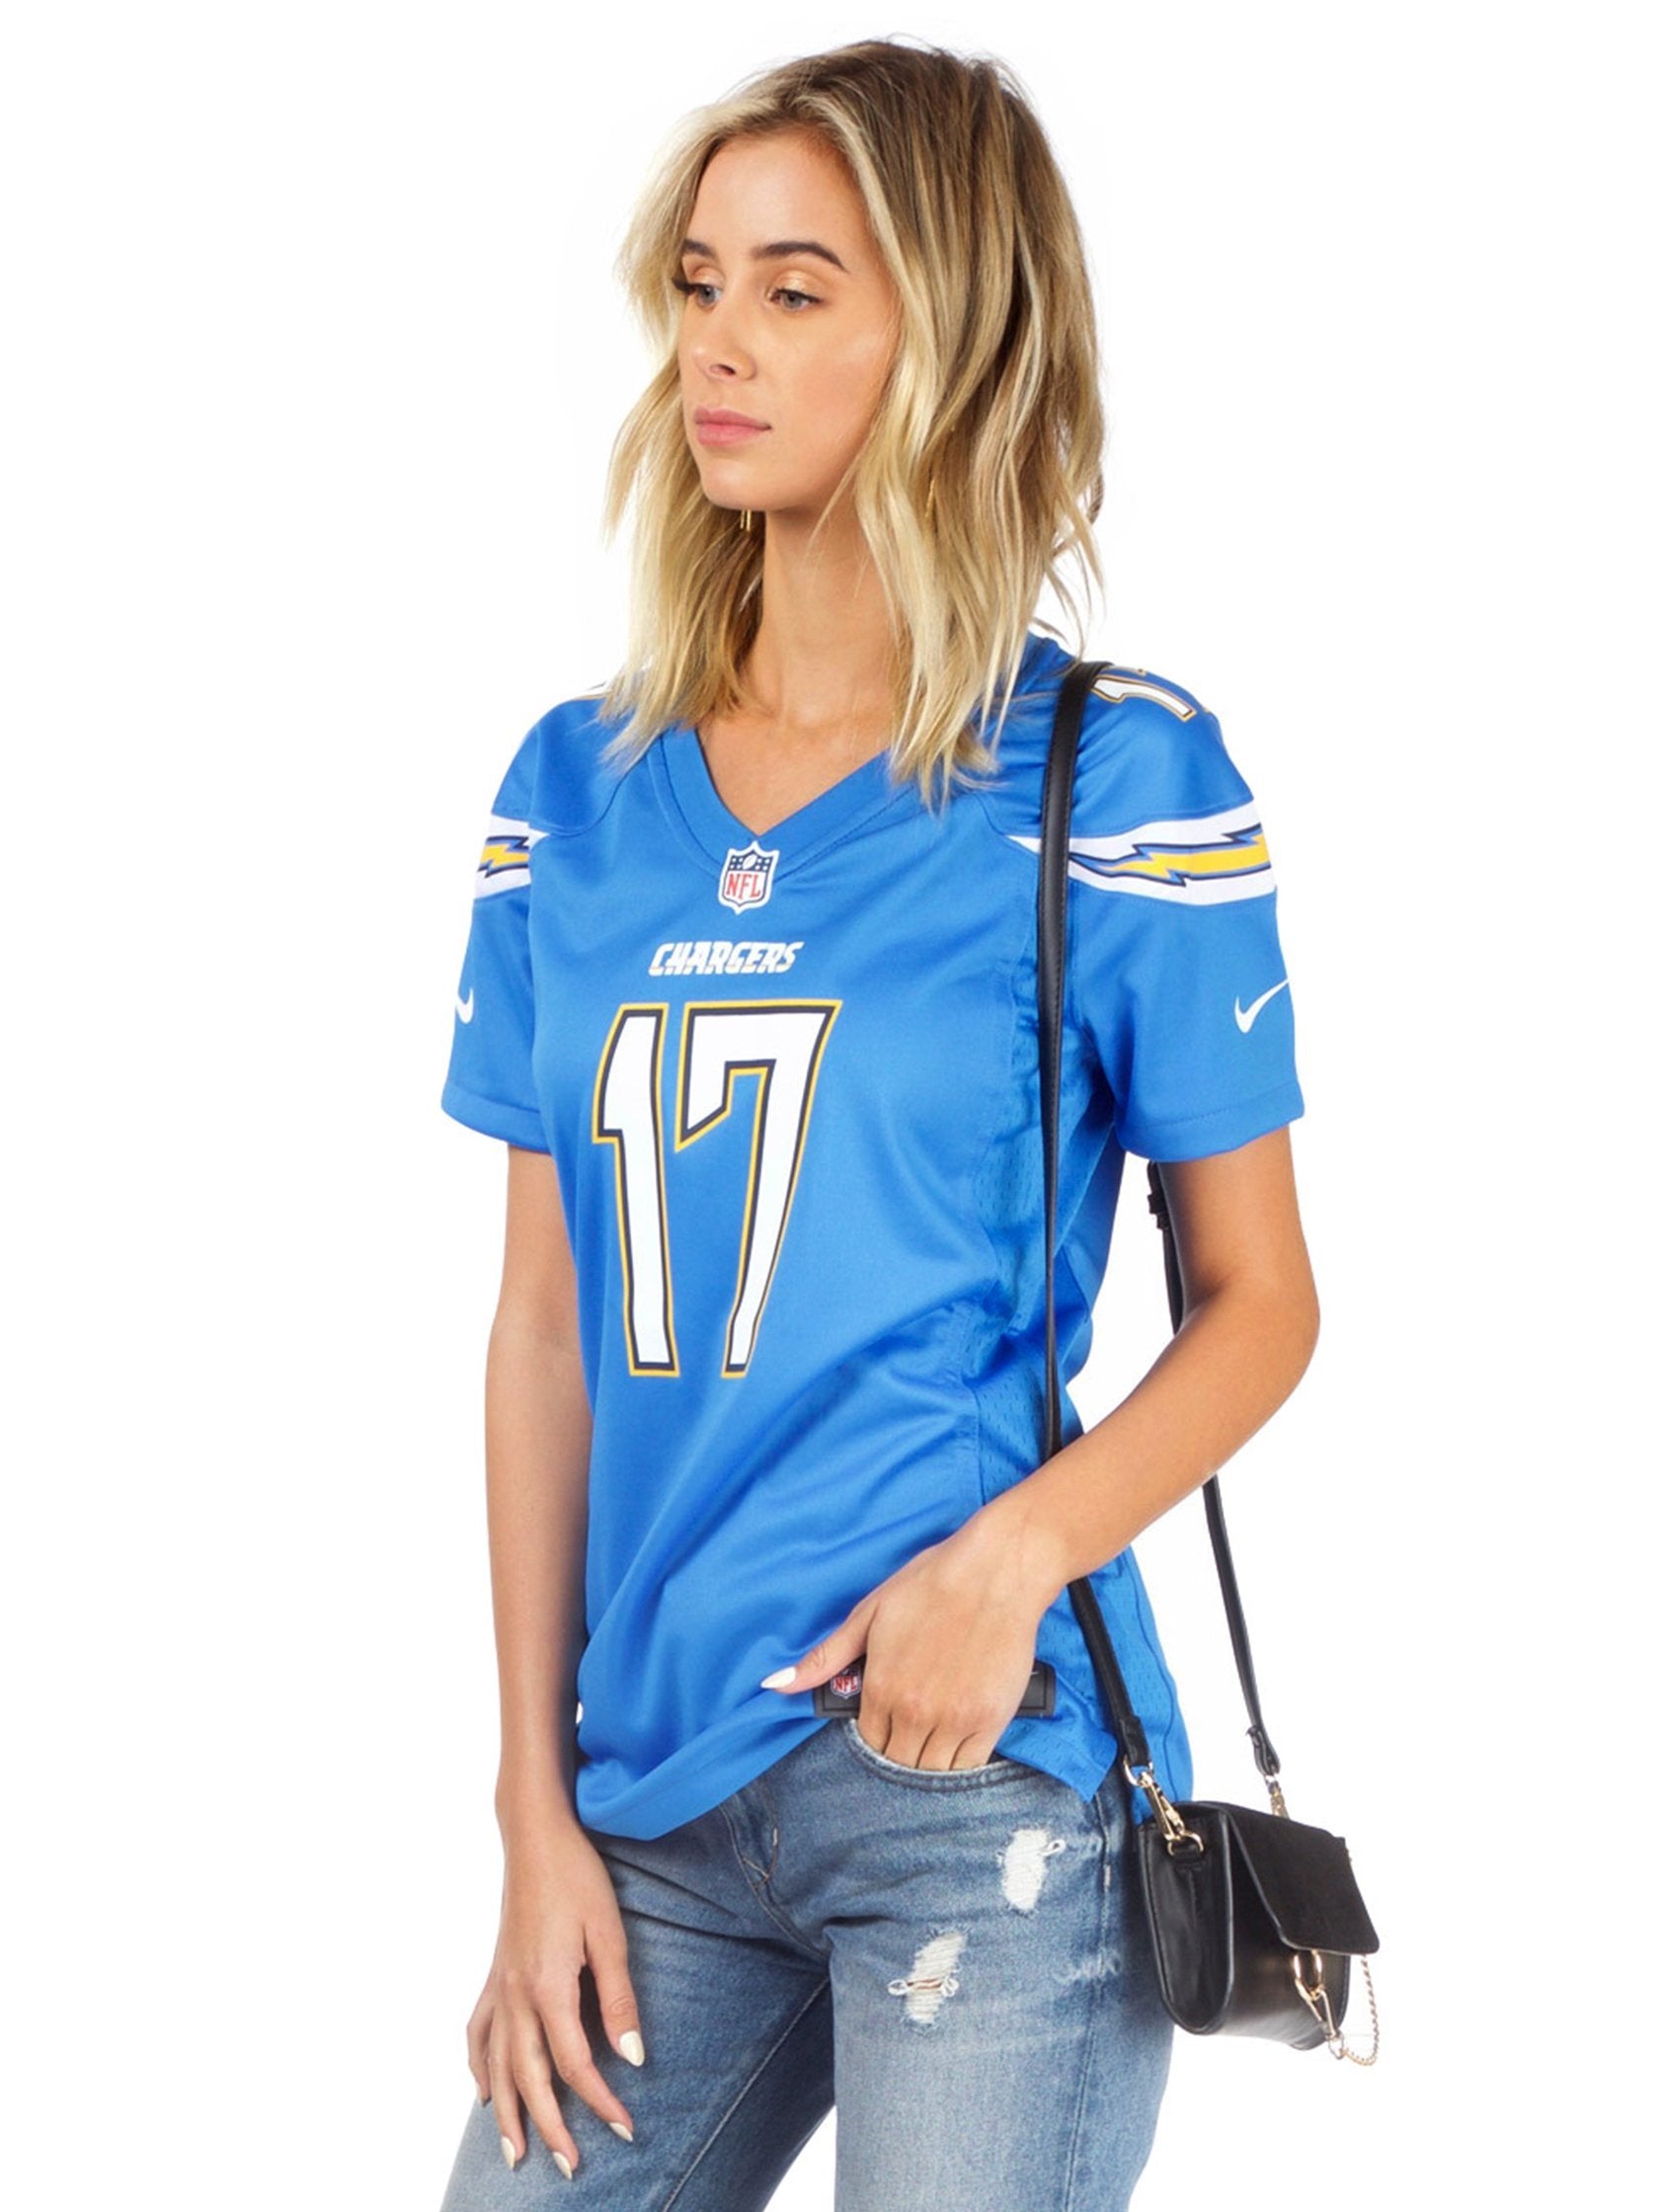 girls chargers jersey